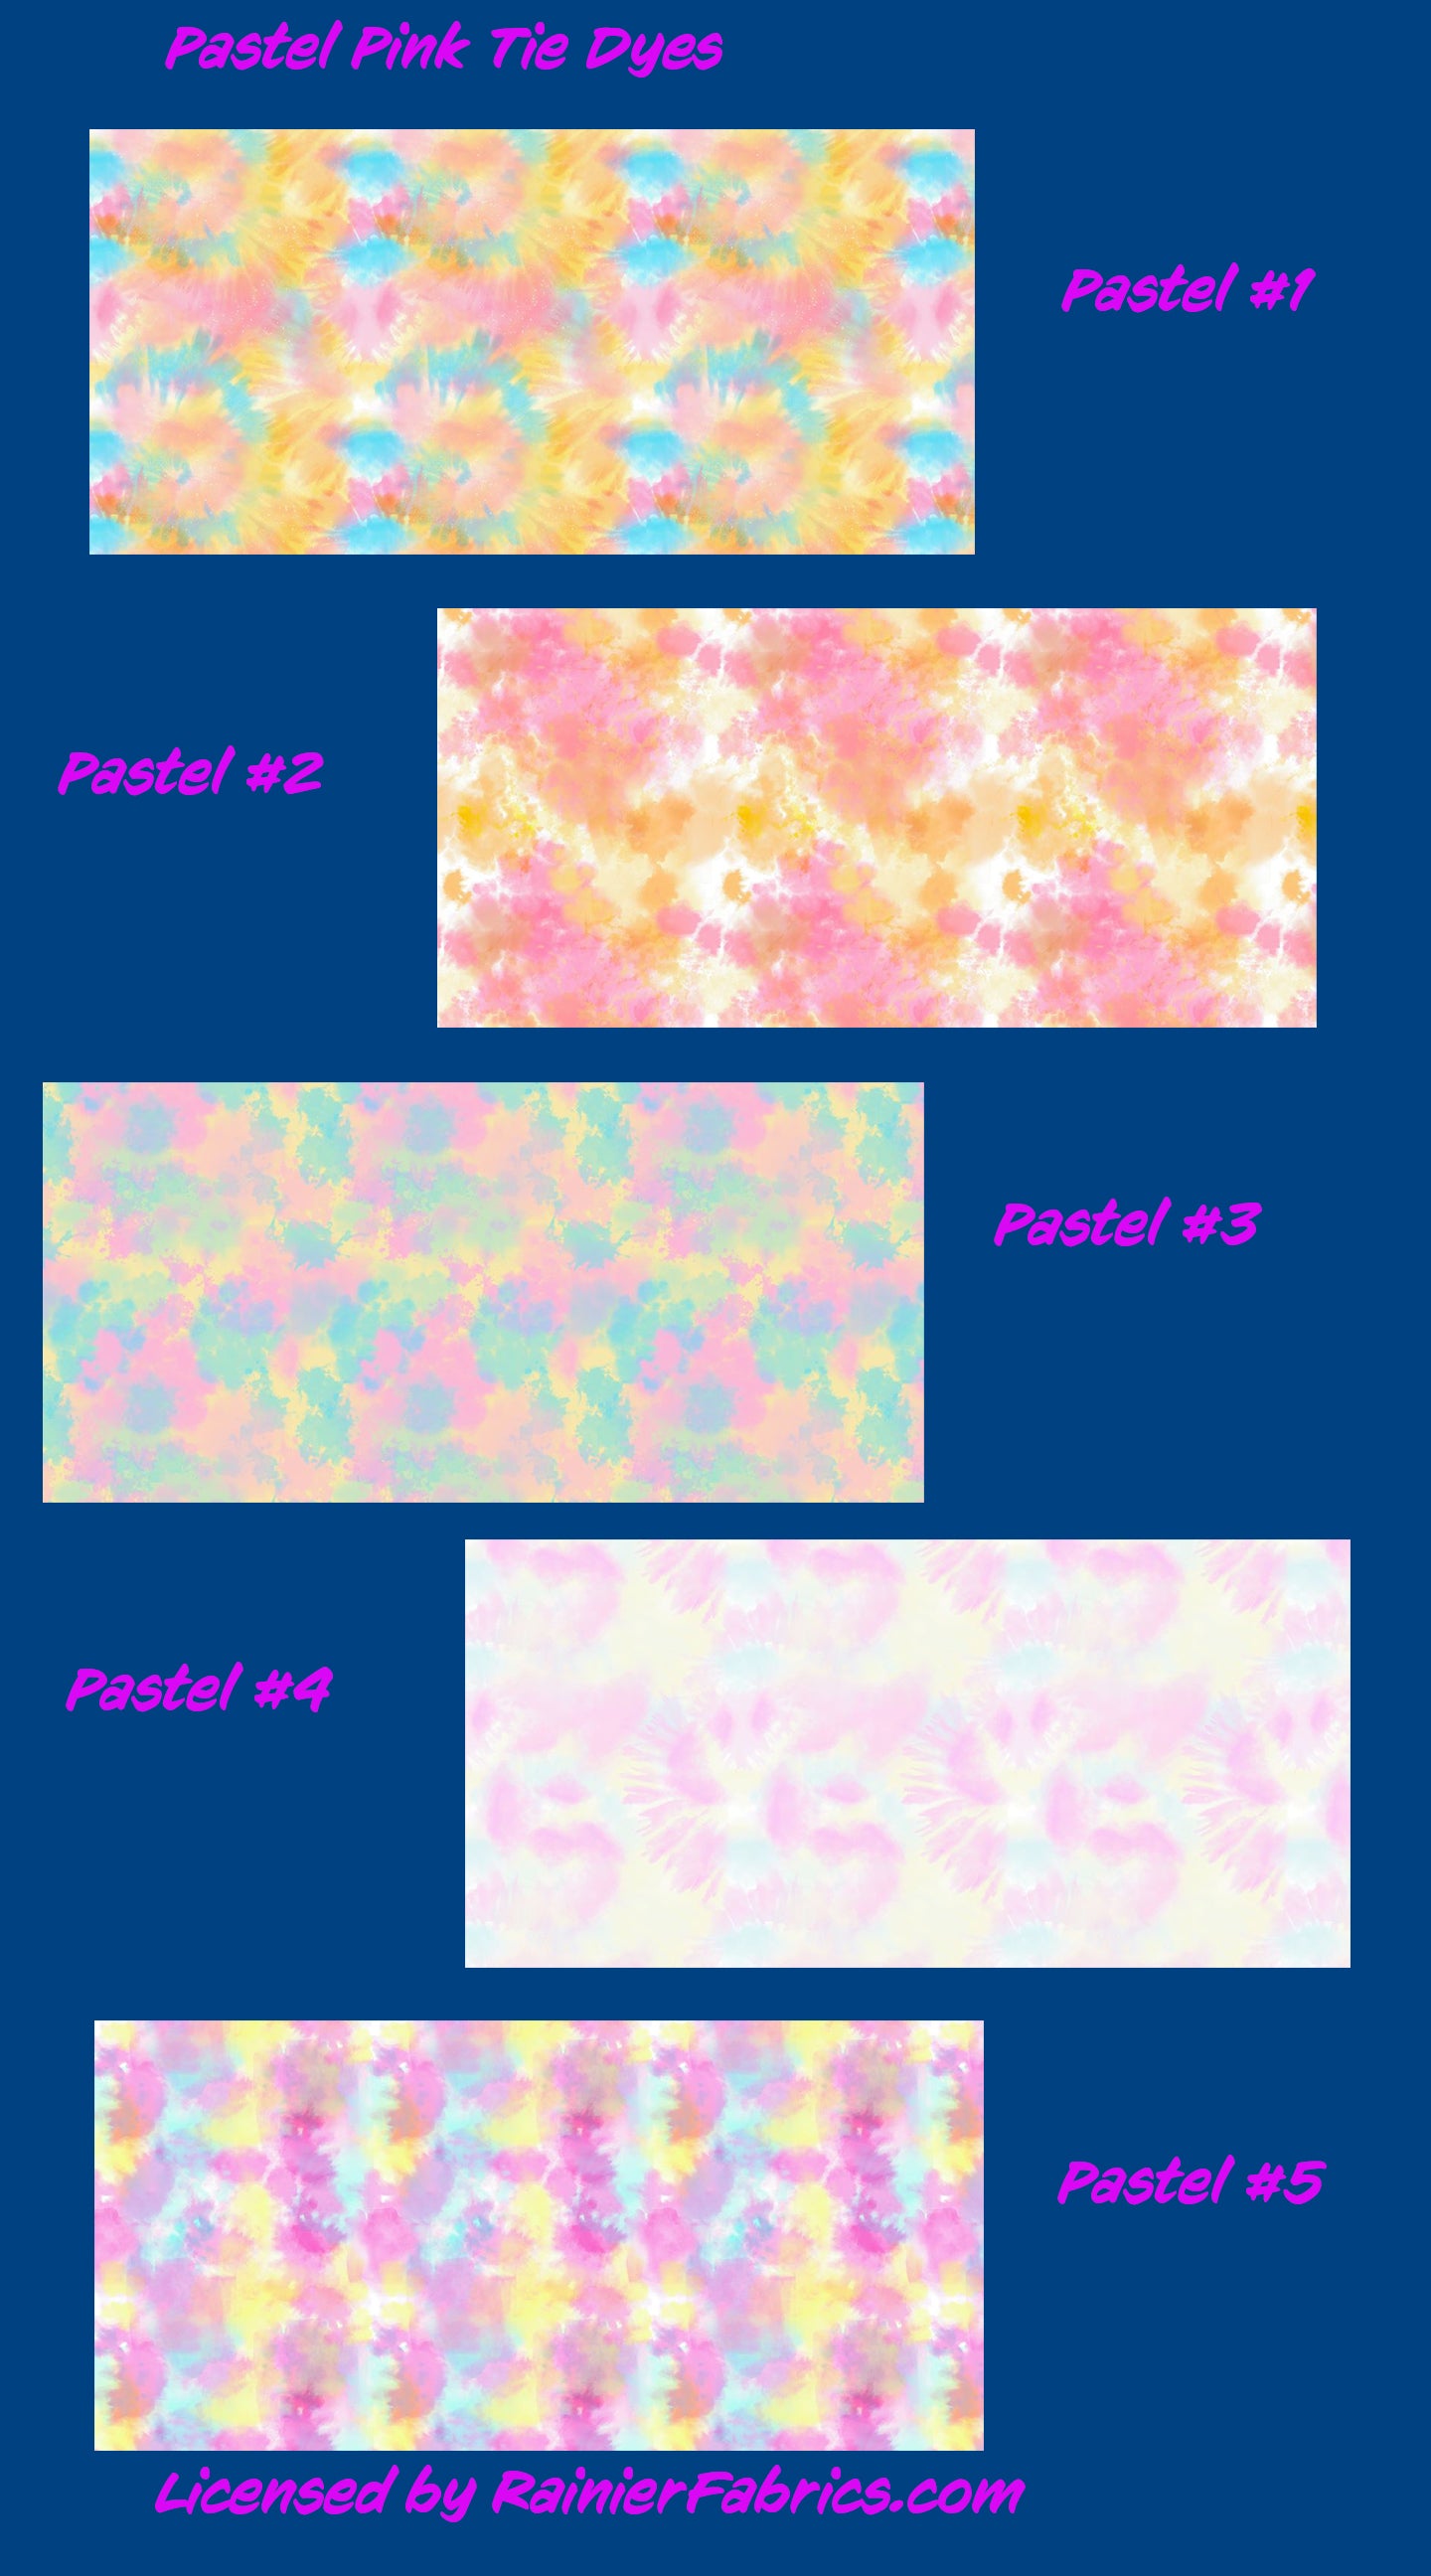 Pastel Pink Tie Dye Collection  - 2-5 day turnaround - Order by 1/2 yard; Description of bases below